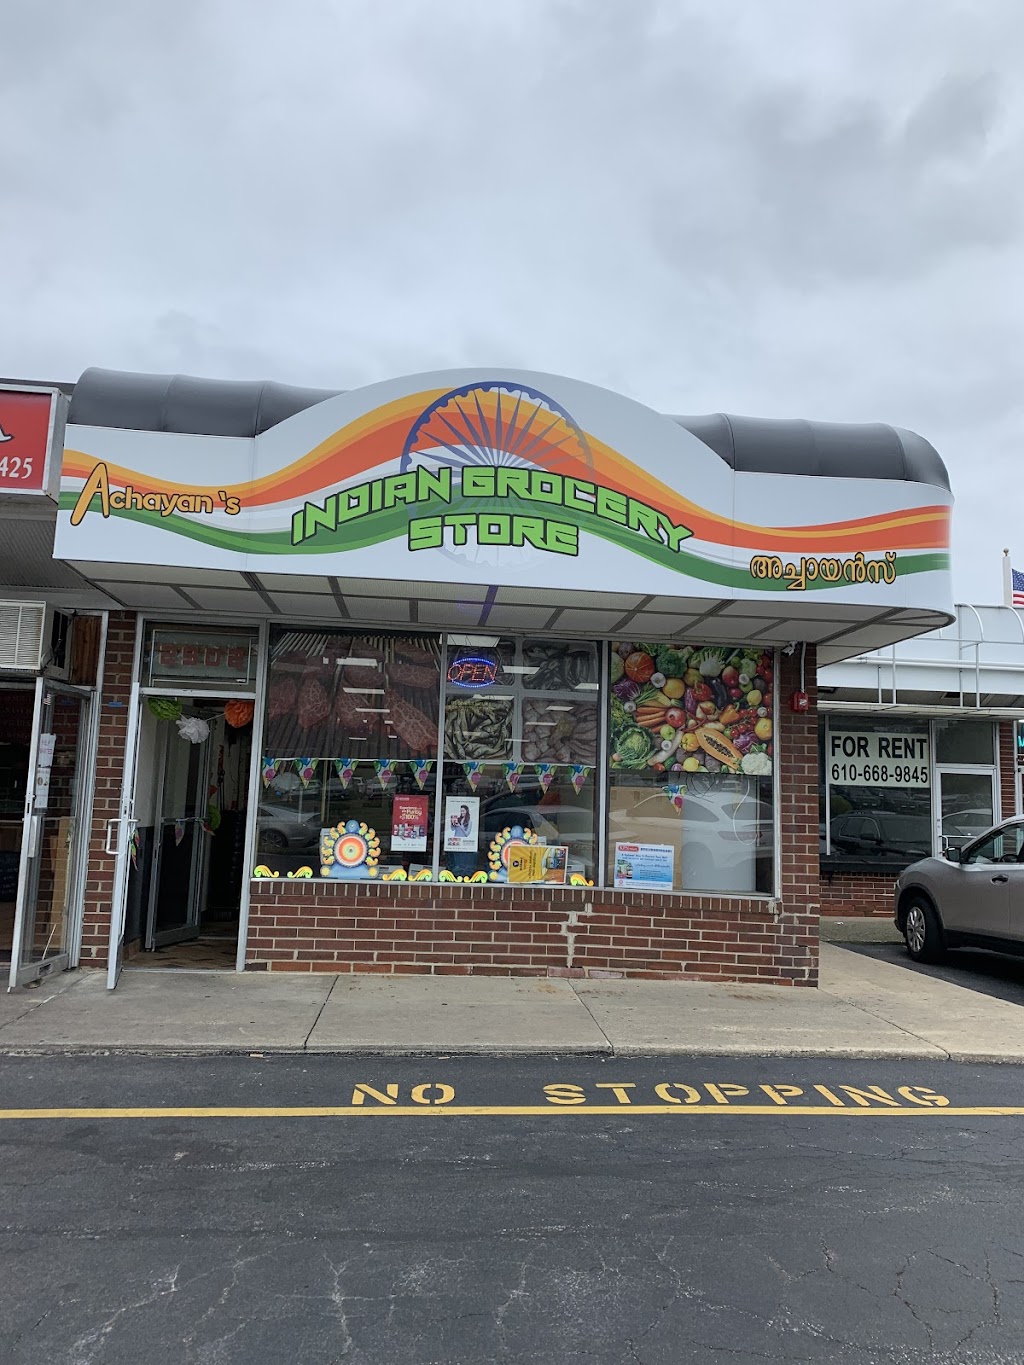 Achayans Indian Grocery Store | 2906 West Chester Pike, Broomall, PA 19008 | Phone: (484) 889-8228